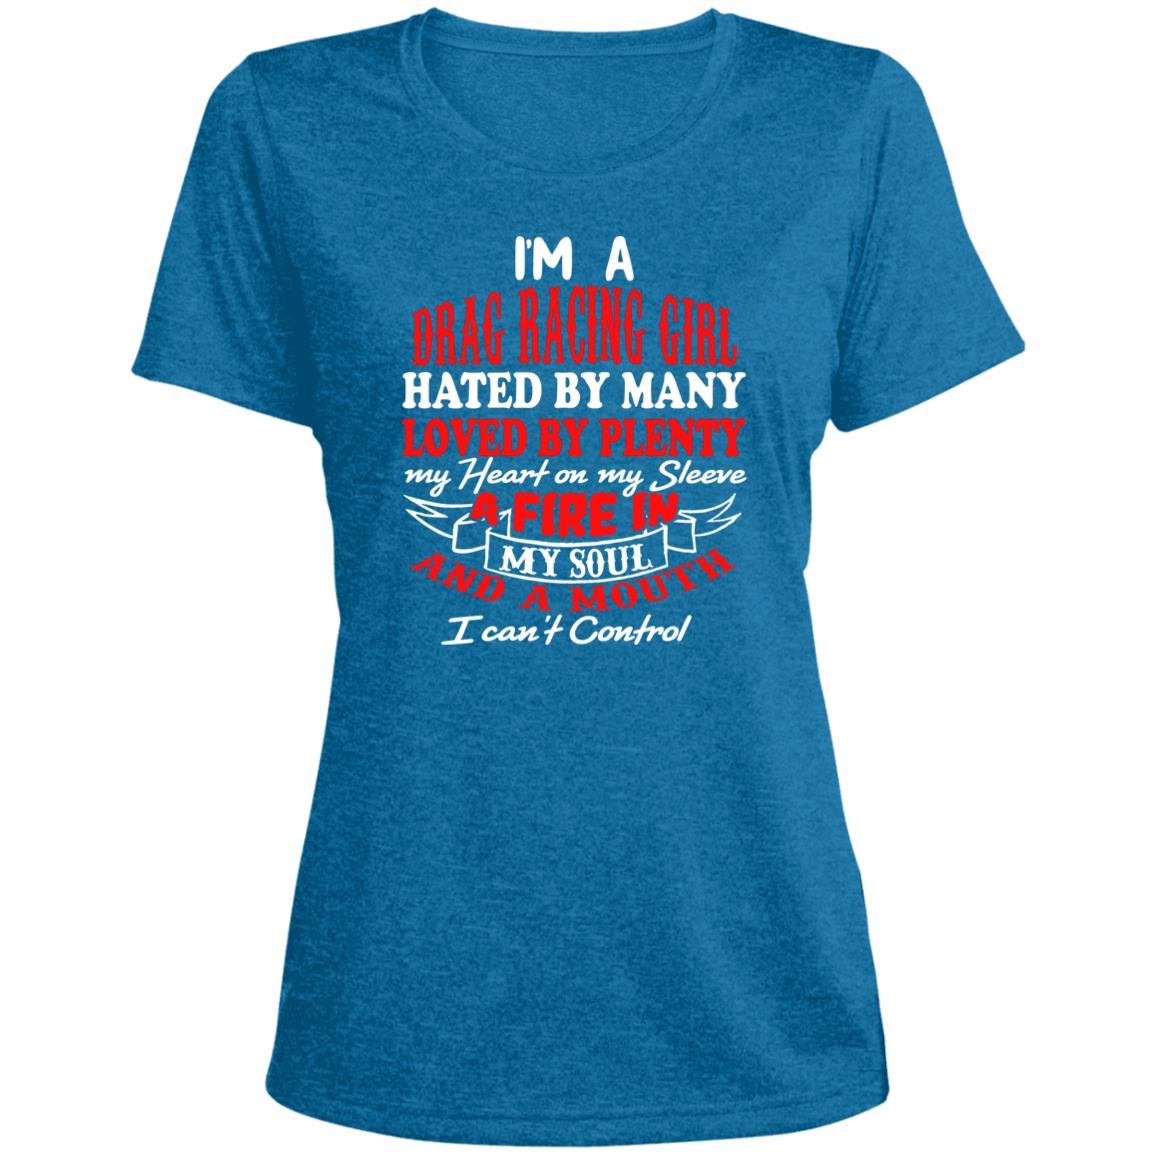 I'm A Drag Racing Girl Hated By Many Loved By Plenty Ladies' Heather Scoop Neck Performance Tee